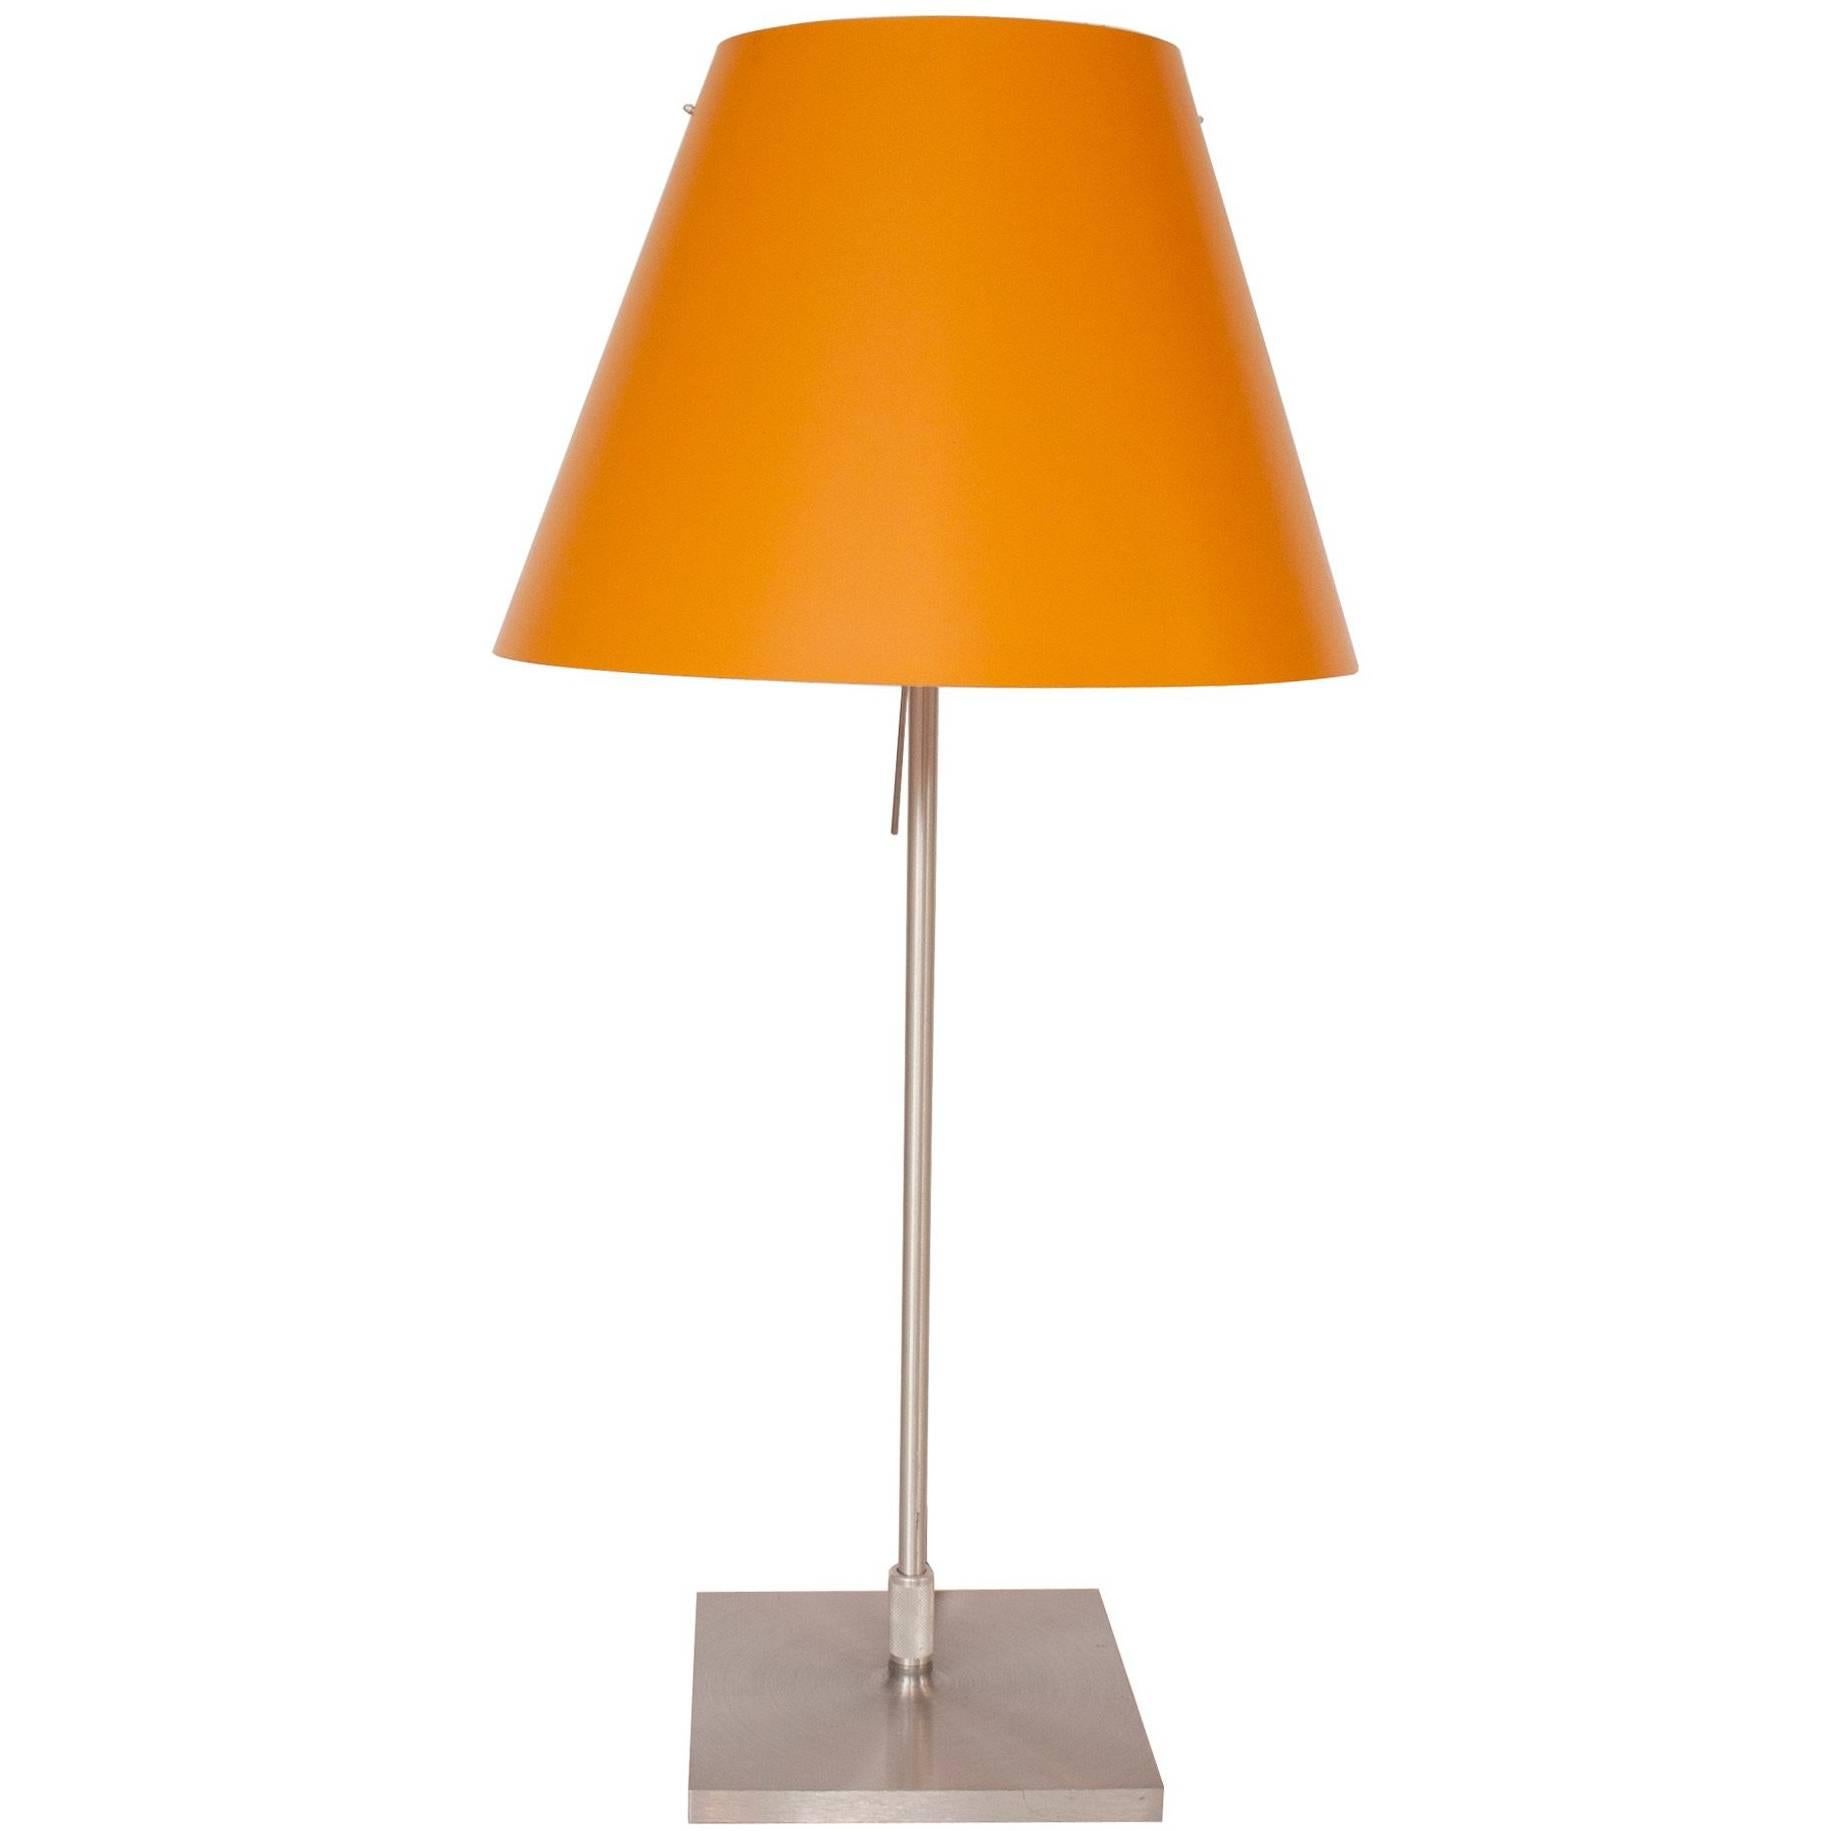 Midcentury Table Lamp Designed by Paolo Rizzatto